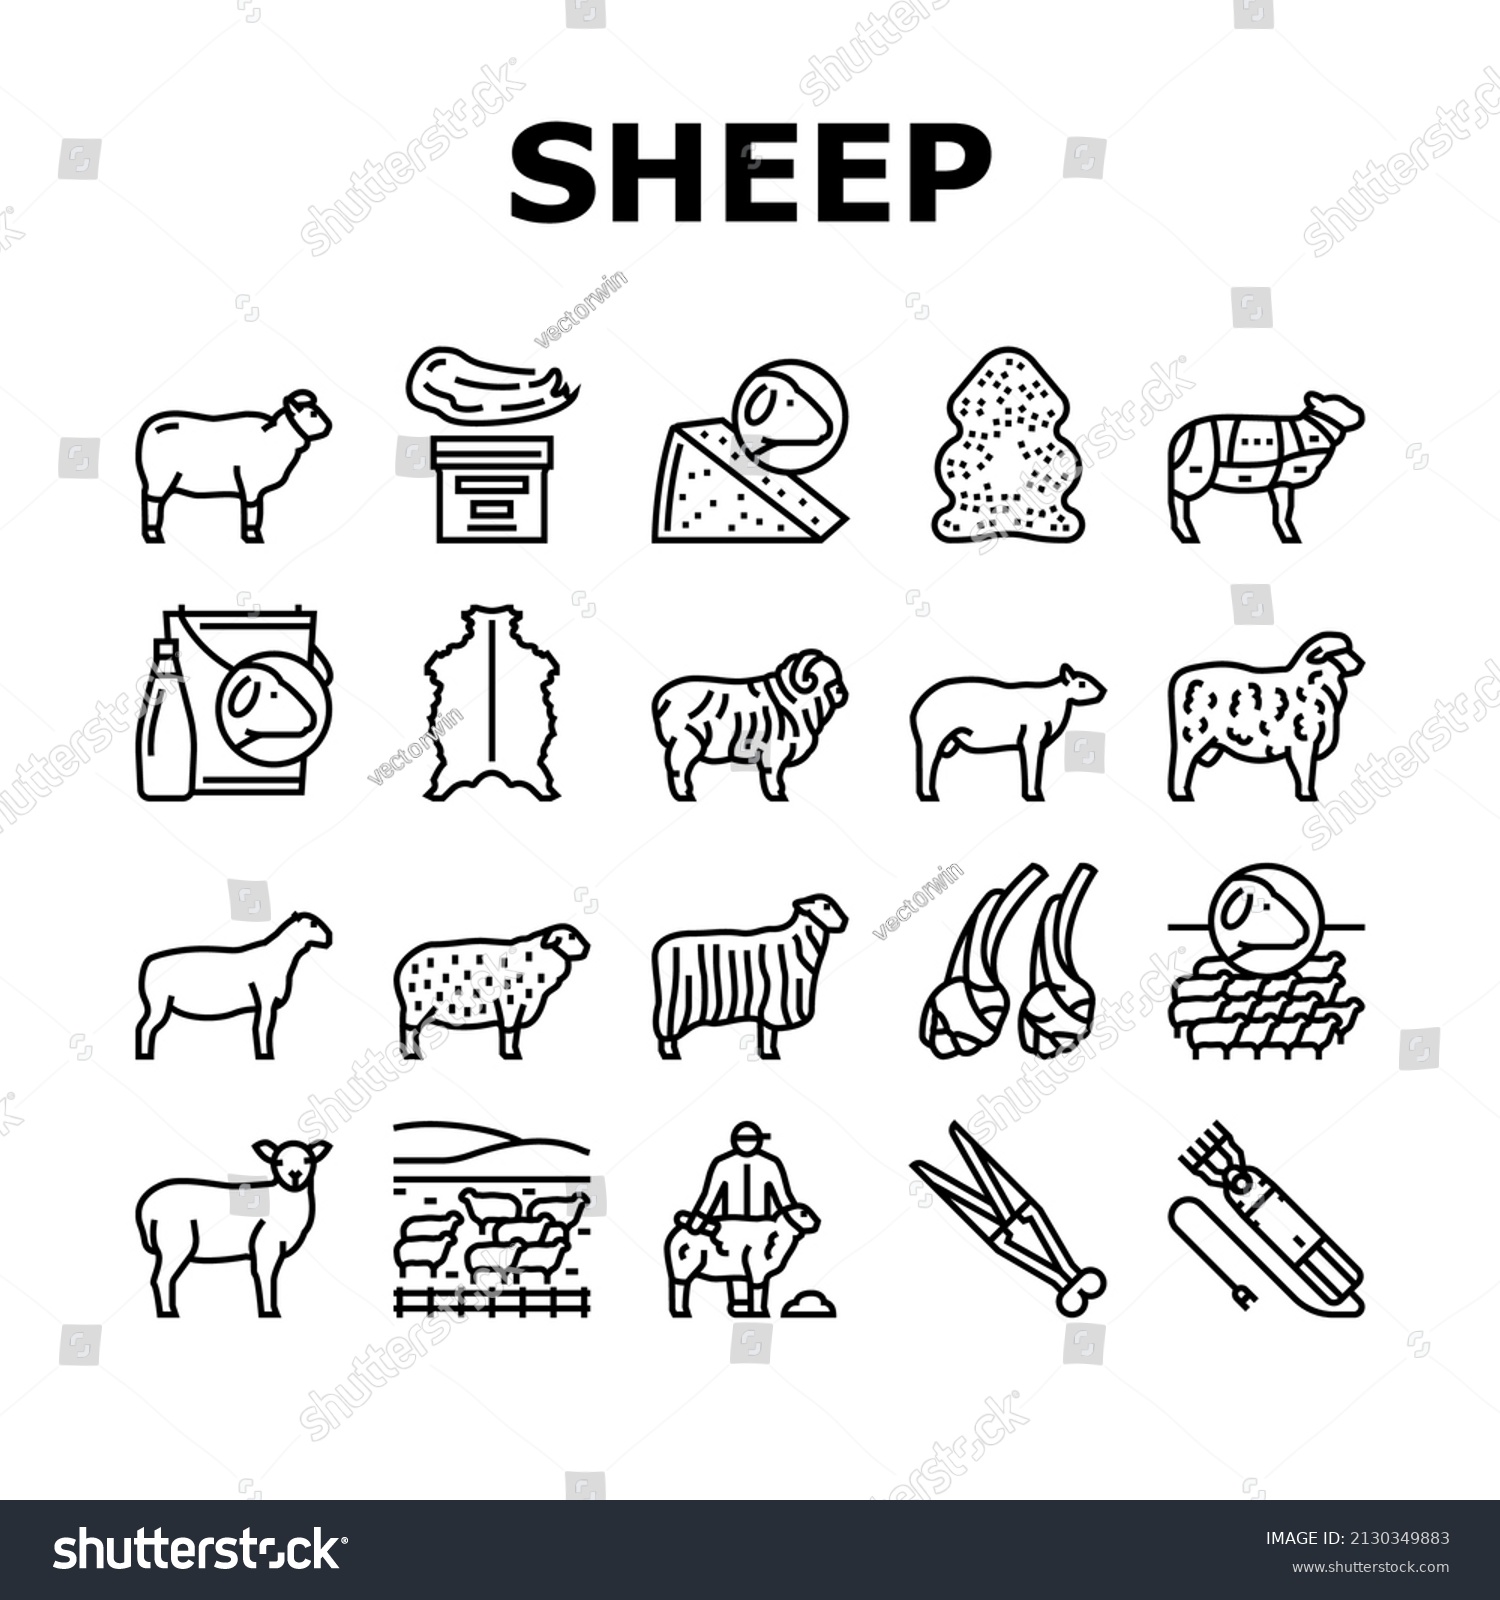 SVG of Sheep Breeding Farm Business Icons Set Vector. Sheep Breeding And Food Producing From Farmland Animal, Lamb Meat And Milk Line. Lanolin Wool Wax And Electric Devices Black Contour Illustrations svg